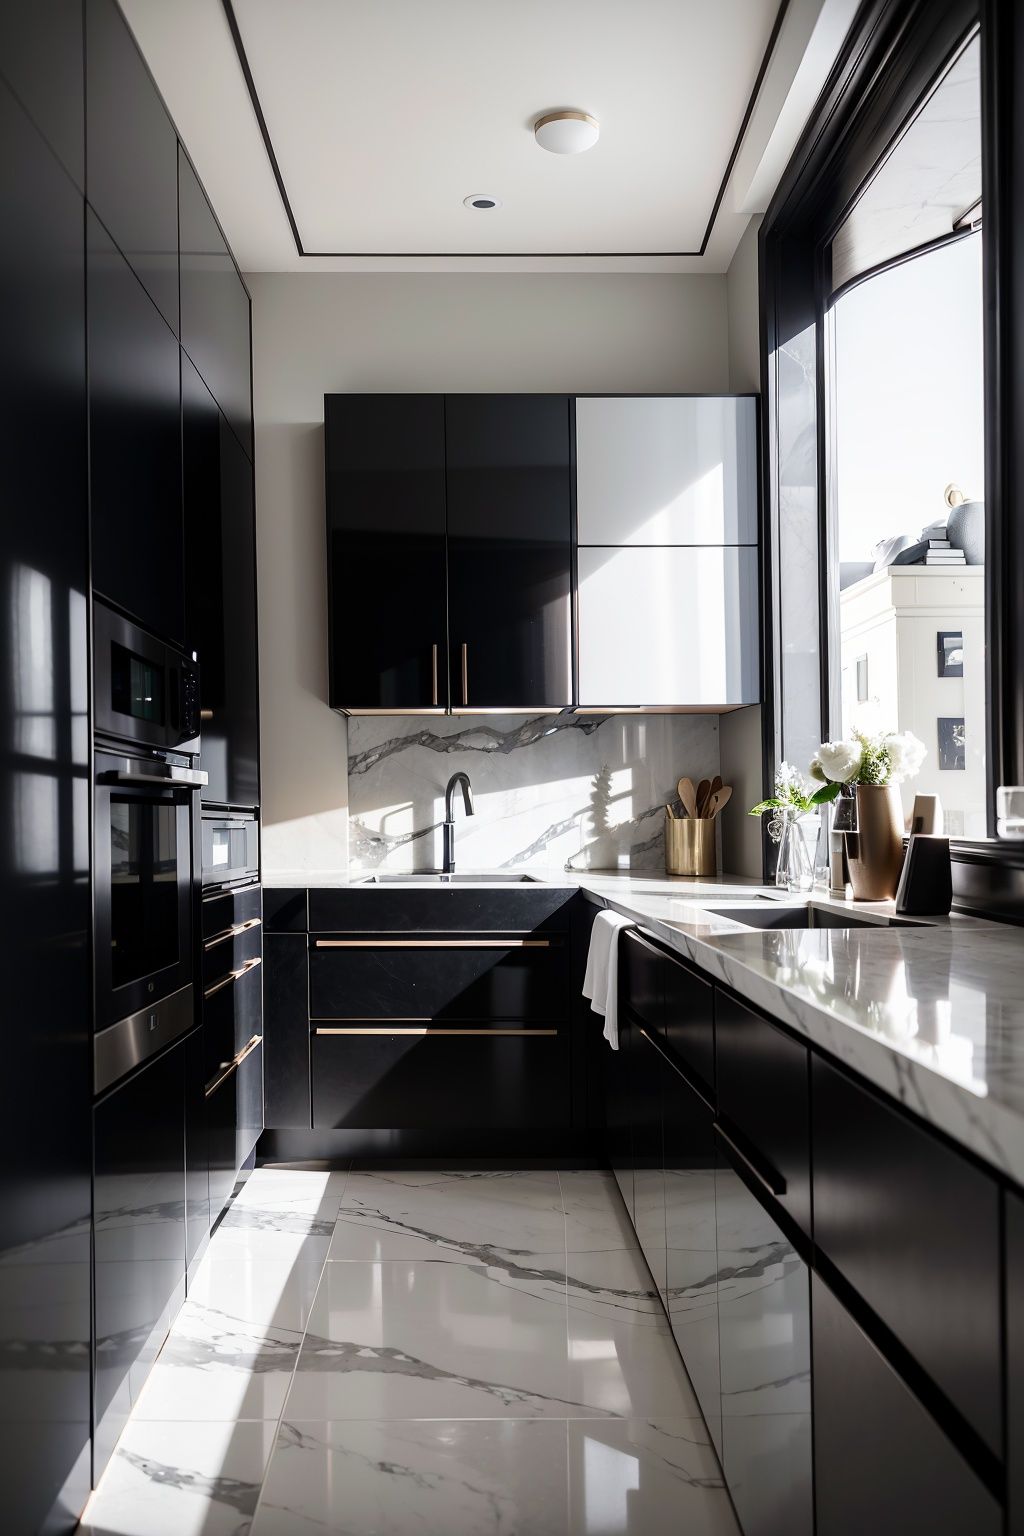 Kitchen, white marble walls, marble floor, black cabinets, metallic texture,(masterpiece), (best quality: 1.2), (ultra-high resolution: 1.2), (realistic: 1.2), (8k: 1.2),nsanely detailed, hyper quality, ultra detailed,
